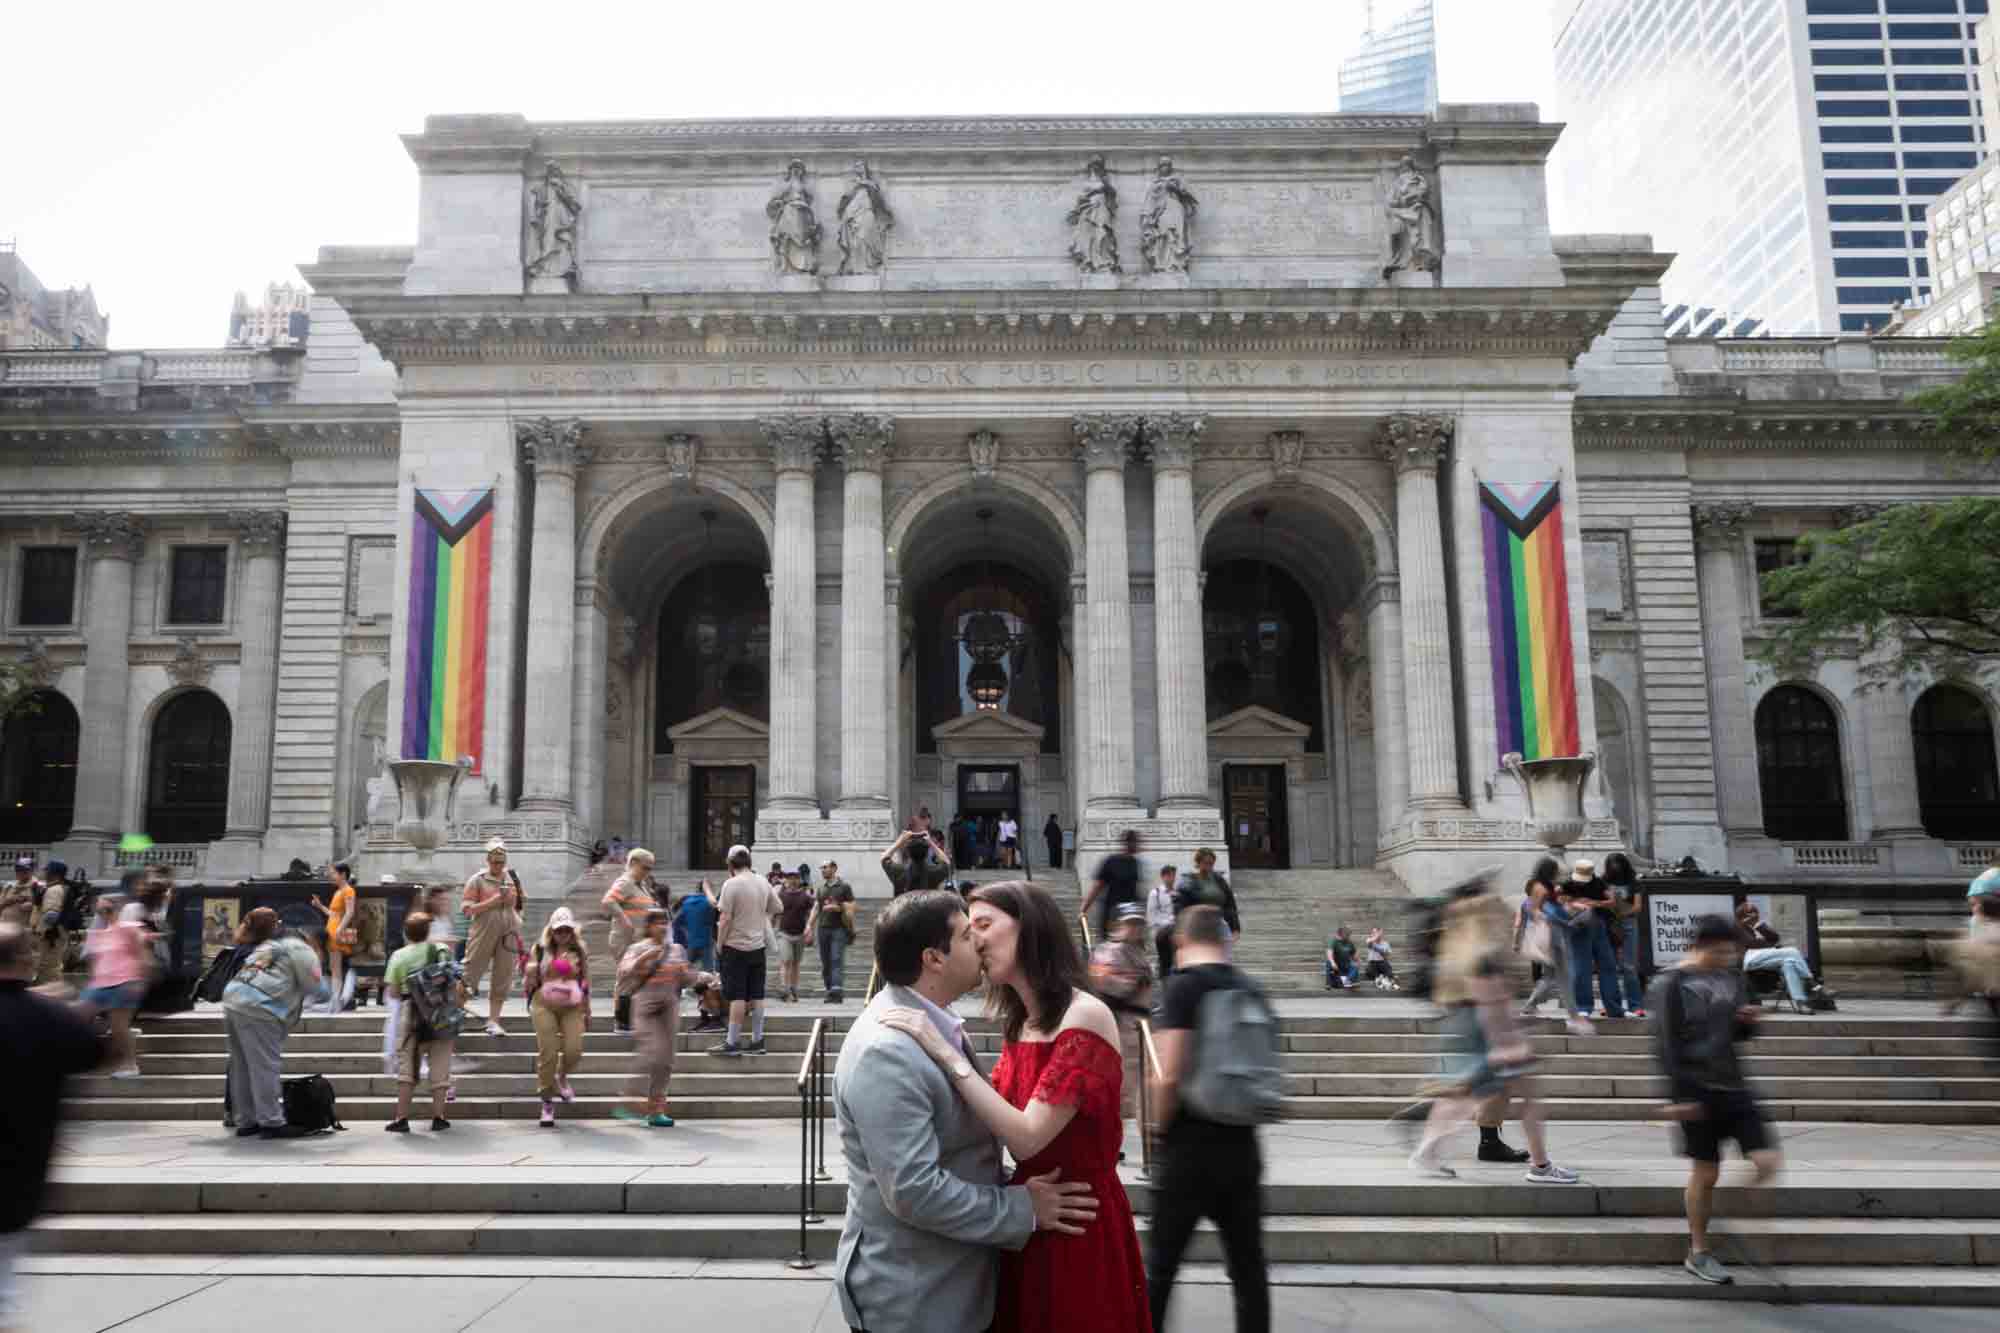 Couple kissing in front of library with people hurrying past after New York Public Library proposal